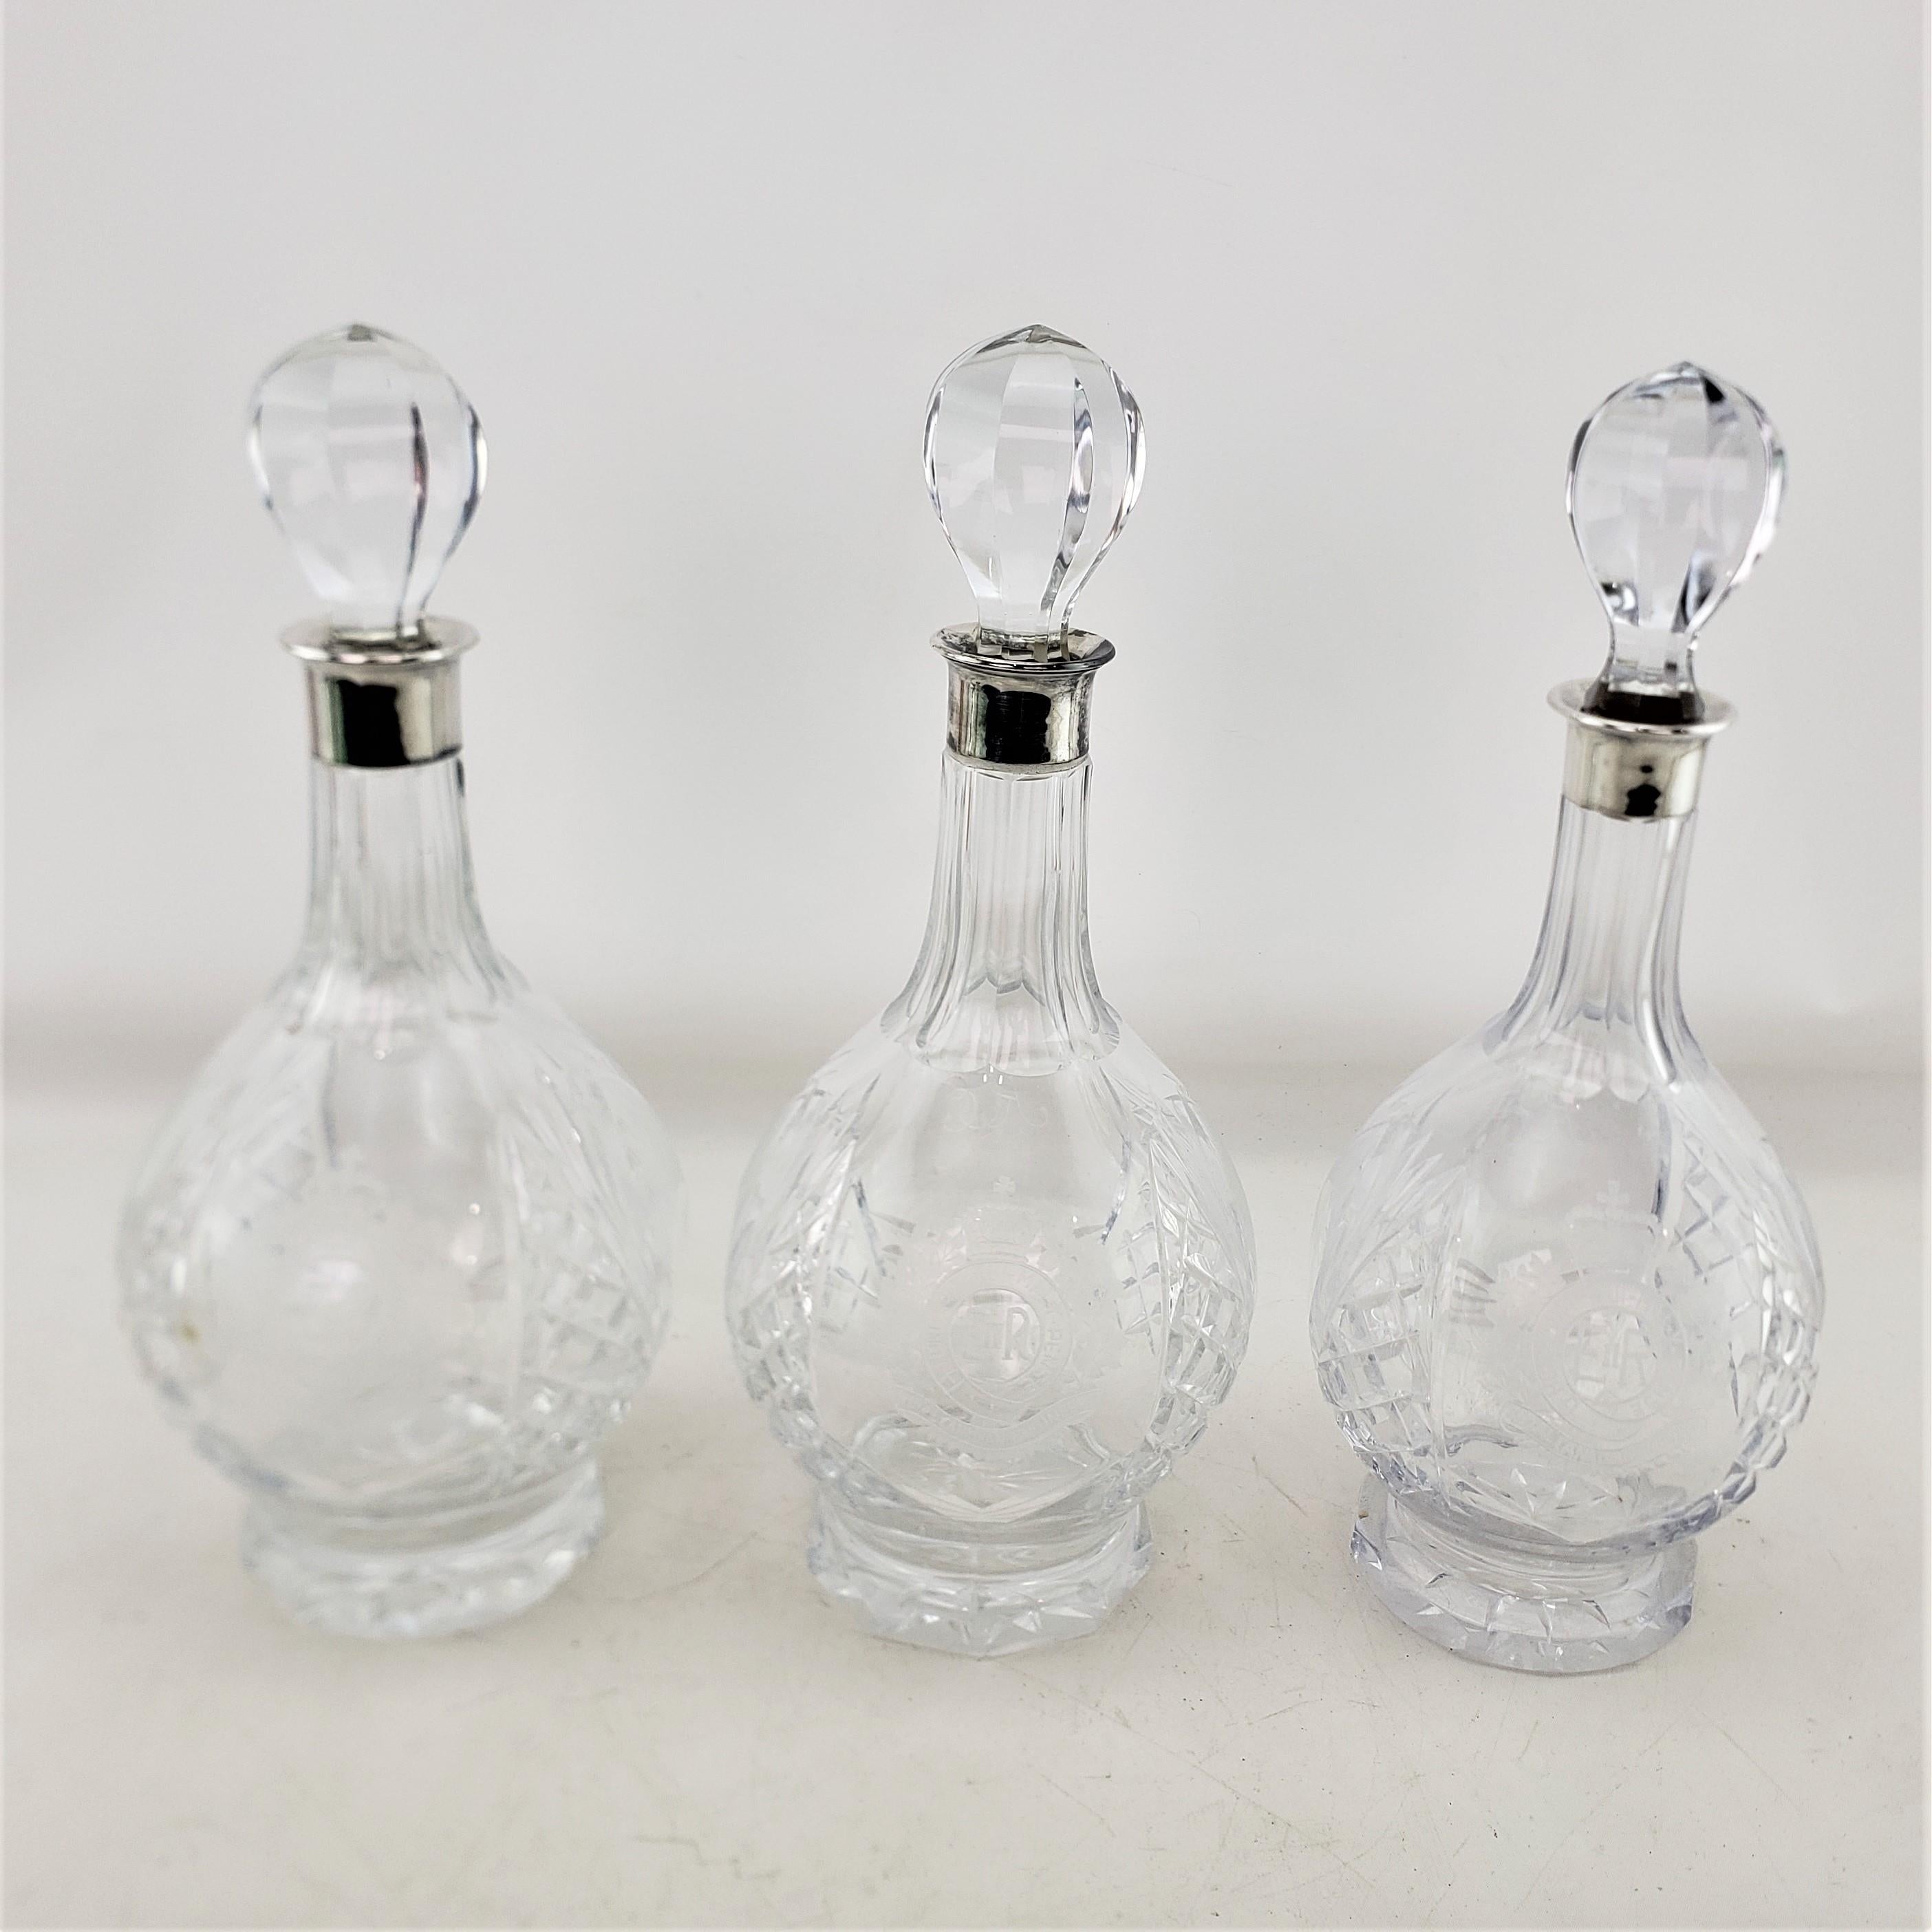 These quite heavy and well executed bottle decanters are possibly hallmarked by an unknown maker, but presumed to have originated from Canada and date to approximately 1970 and done in a period midcentury style. The decanters are composed of lead